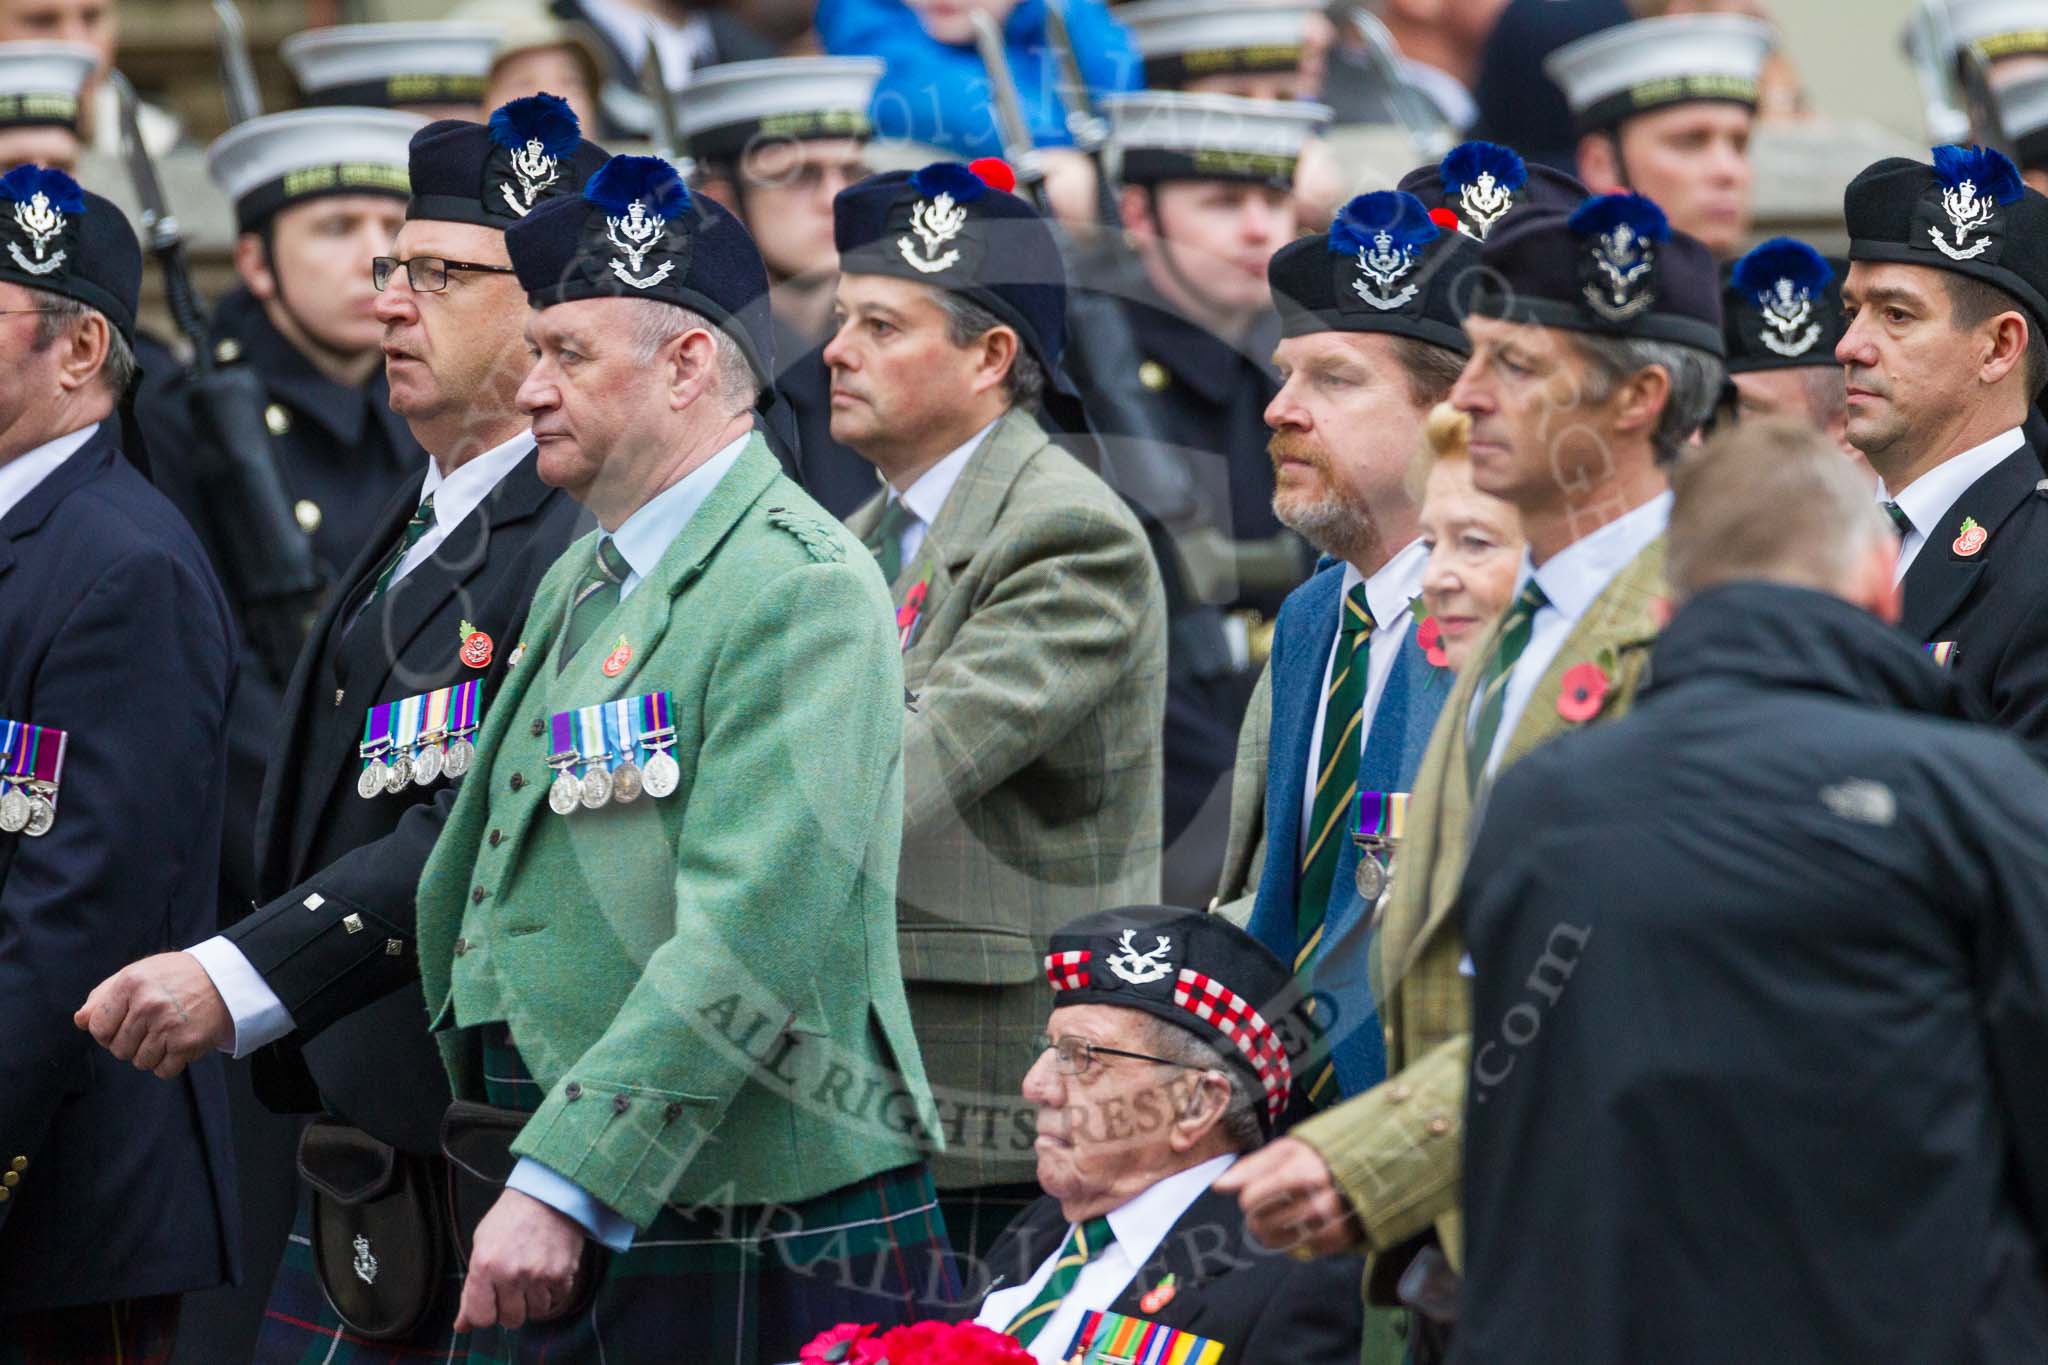 Remembrance Sunday at the Cenotaph 2015: Group A8, Queen's Own Highlanders Regimental Association.
Cenotaph, Whitehall, London SW1,
London,
Greater London,
United Kingdom,
on 08 November 2015 at 12:10, image #1230